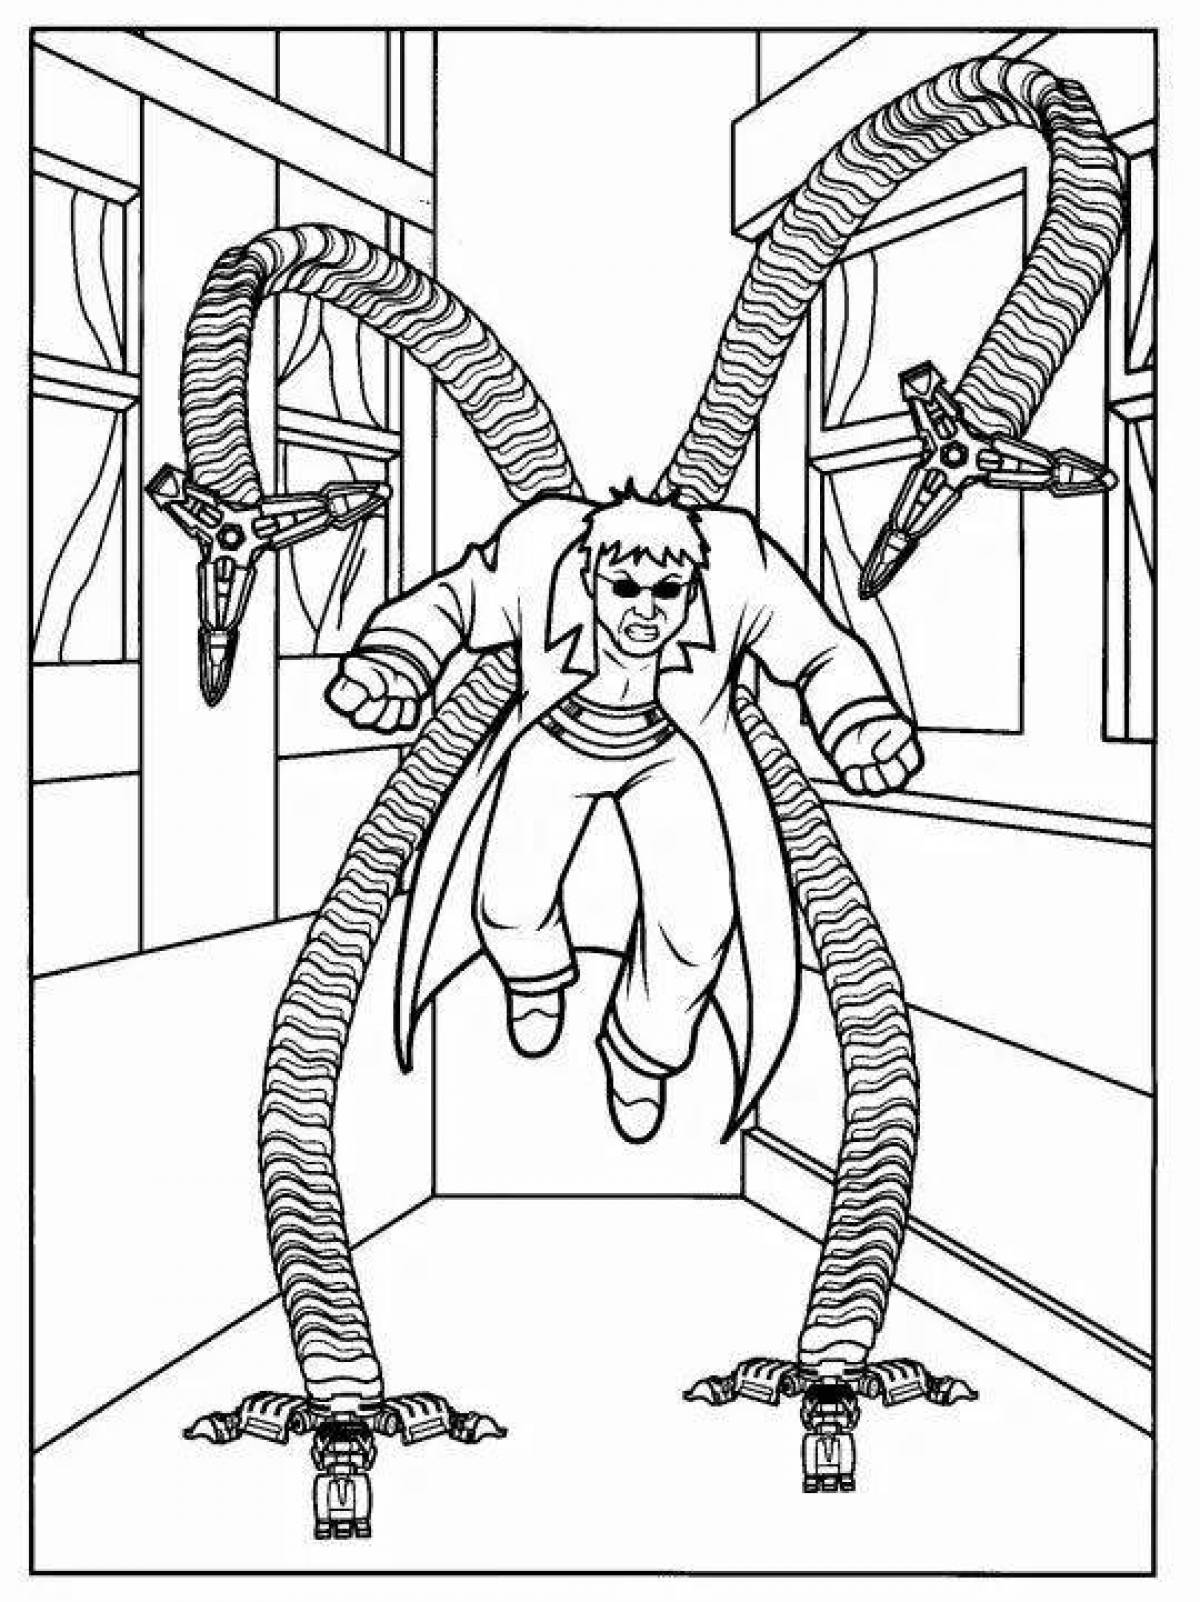 Coloring page spectacular doctor octopus